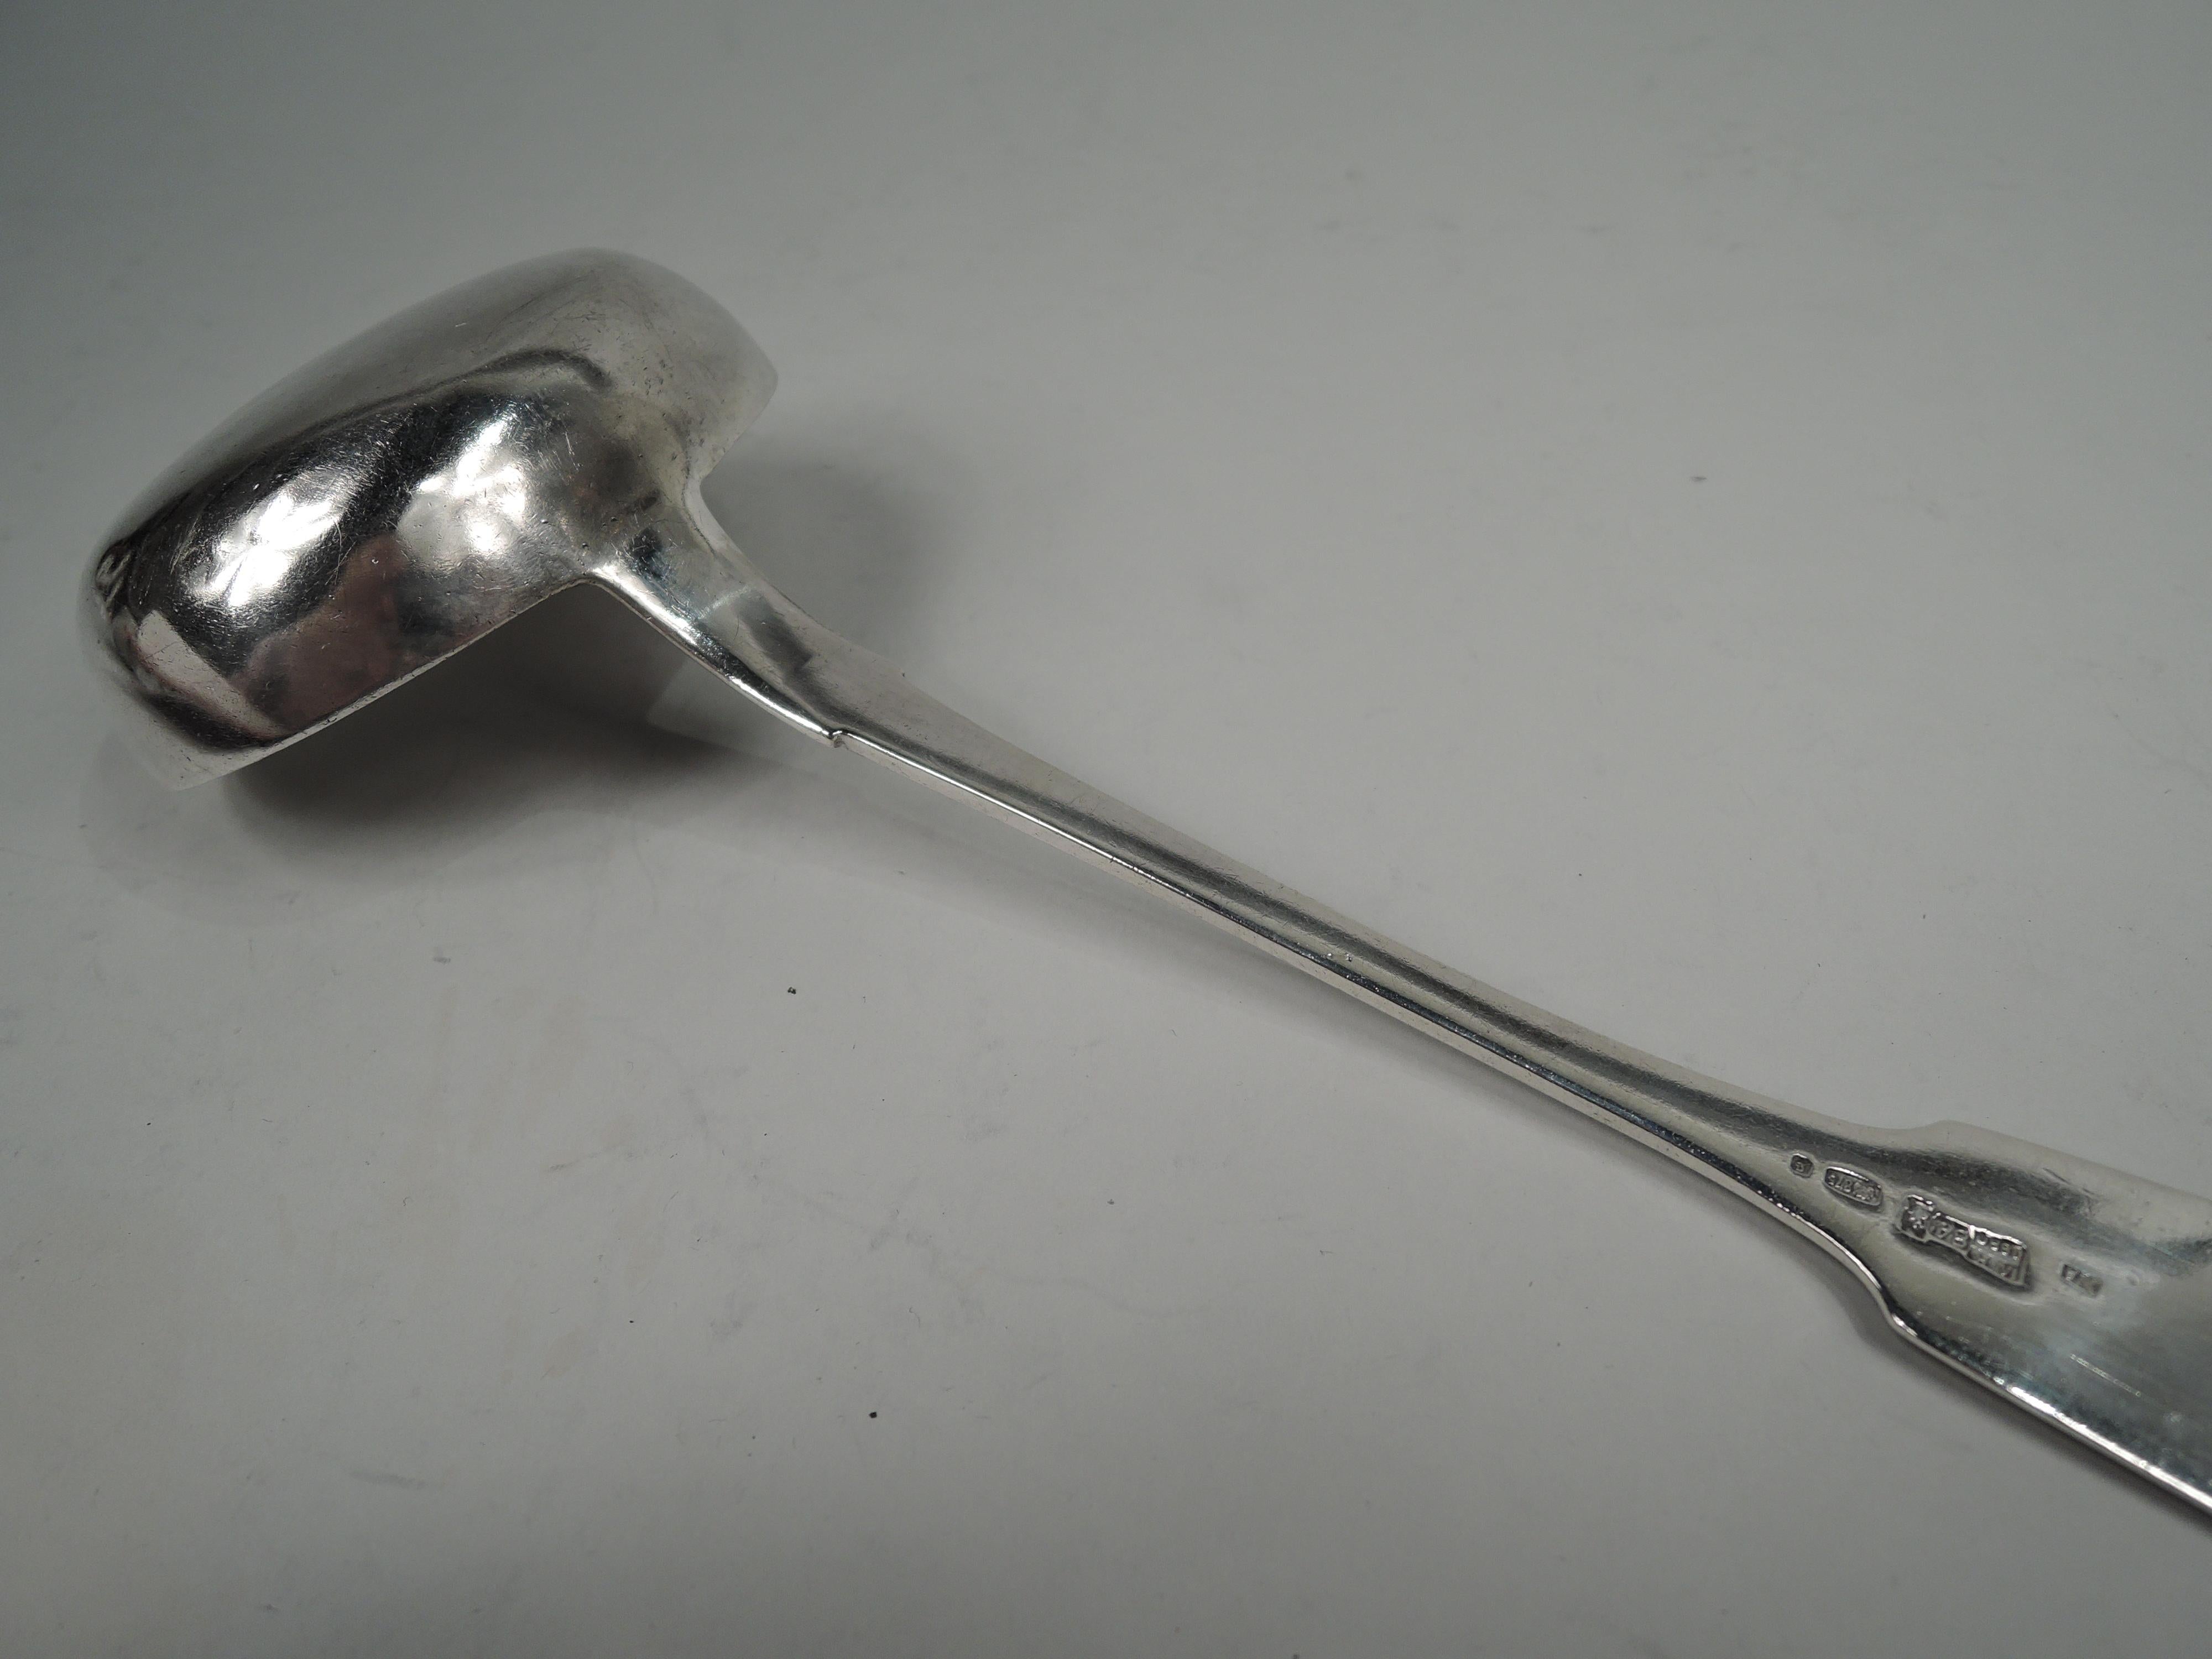 Russian 875 silver ladle, ca 1880. Oval bowl and fiddle terminal with engraved initials and year 1881. A nice serving piece from the twilight of tsarist Russia. Marks include maker’s (PA) stamp and Moscow assayer’s (Aleksandr Nicolayevich Krollau)